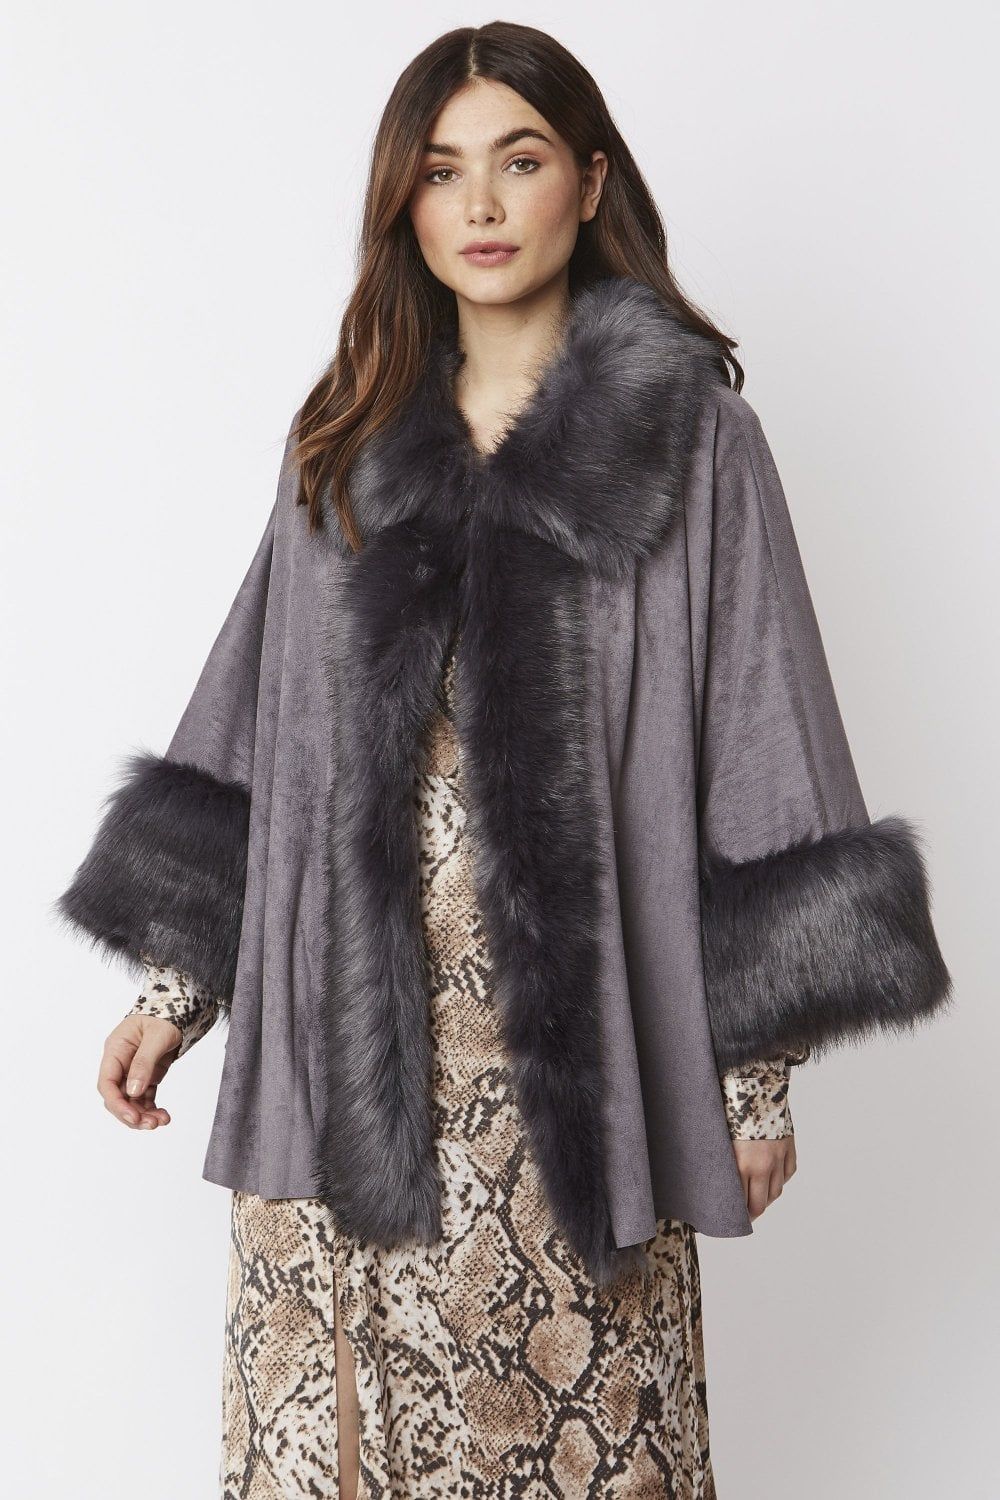 How lovely would this cape be in your Winter wardrobe!